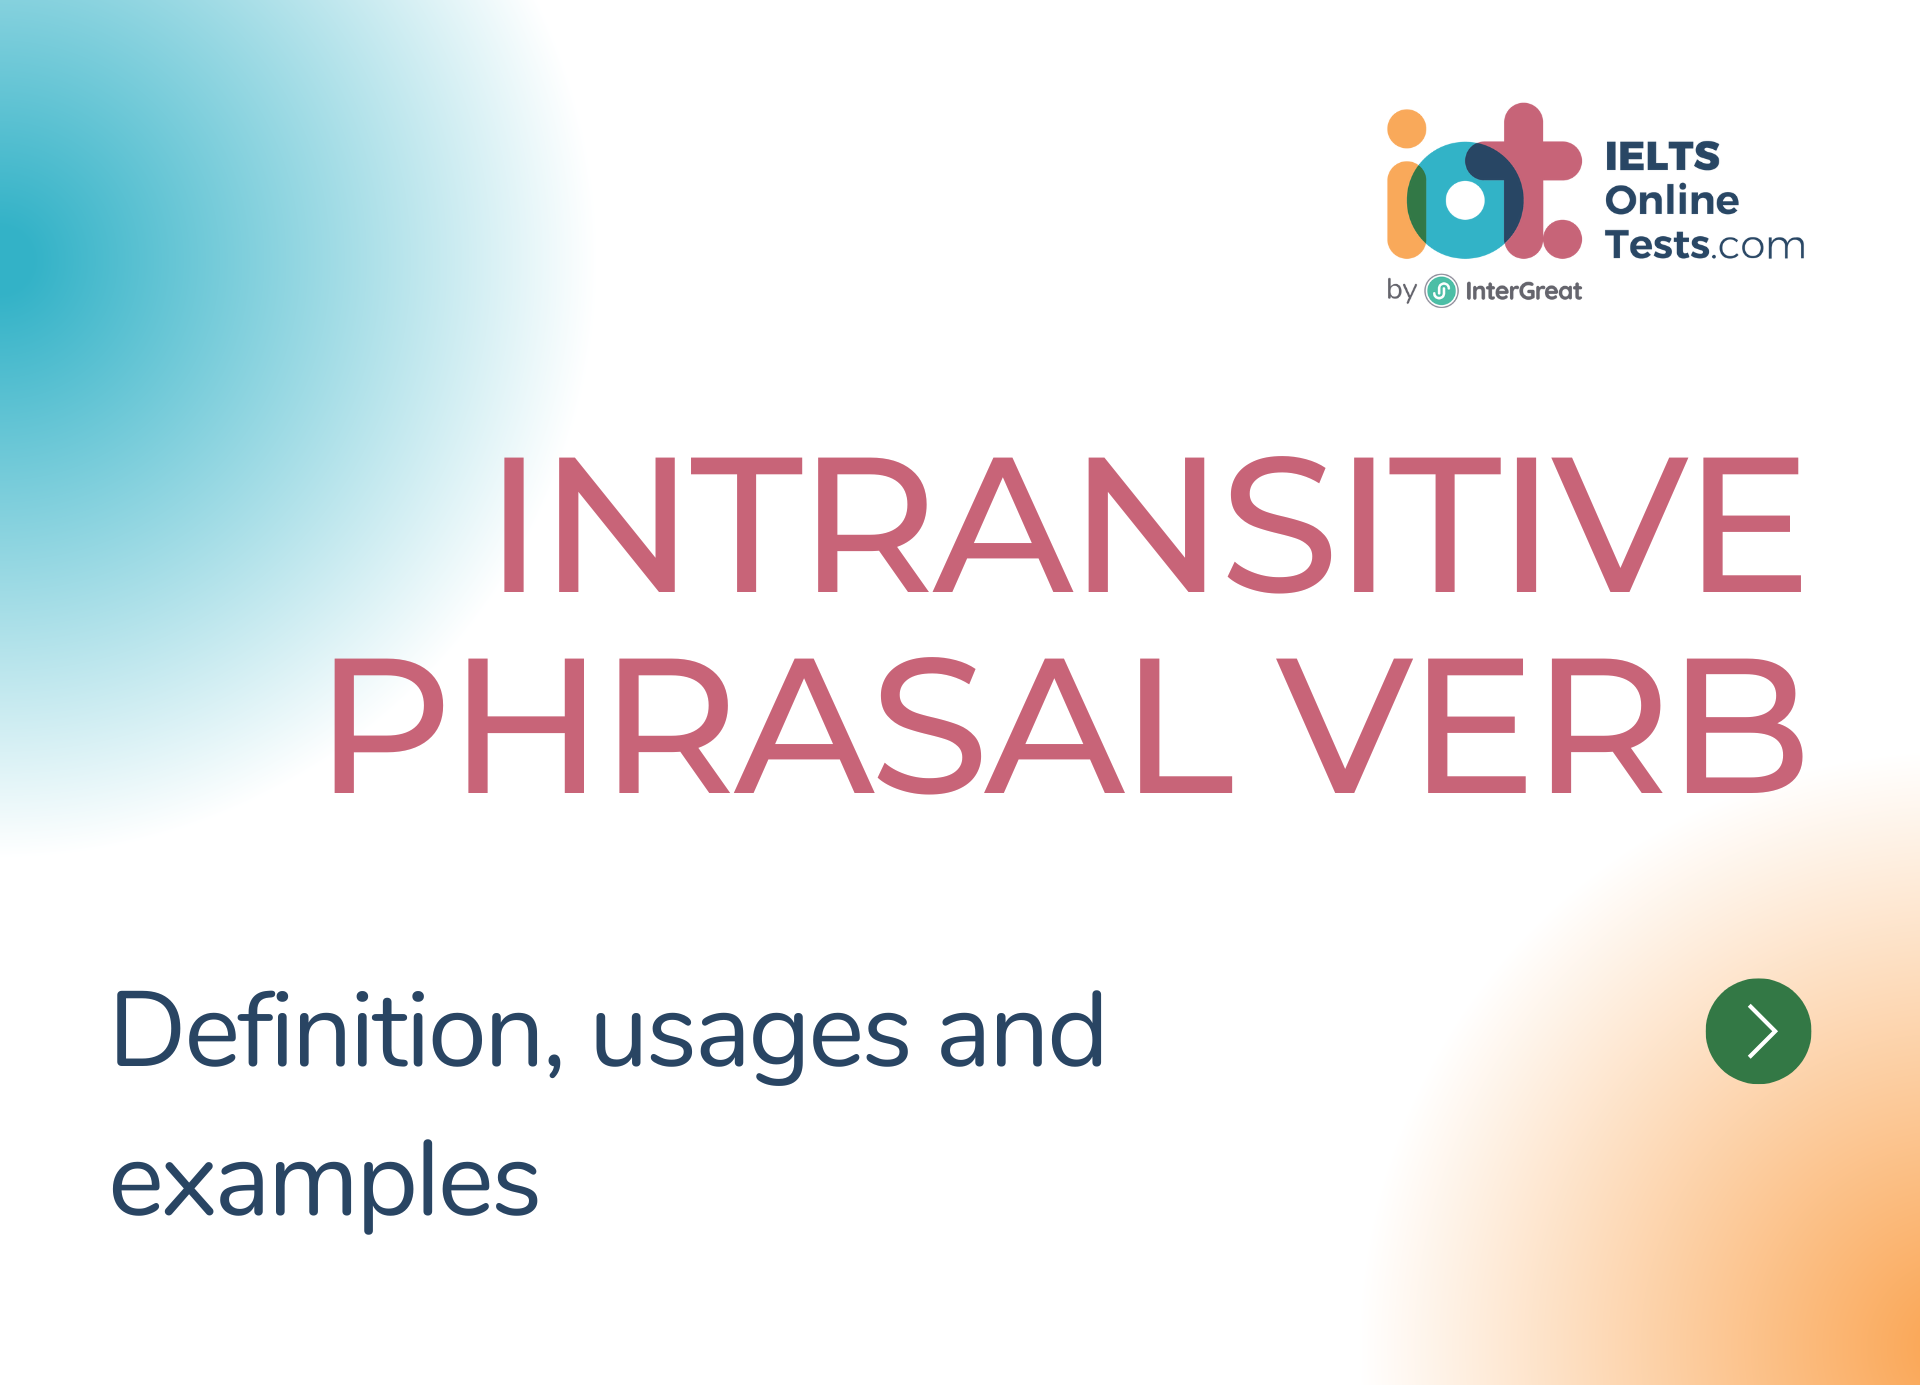 These phrasal verbs will help you at work! Communicating with